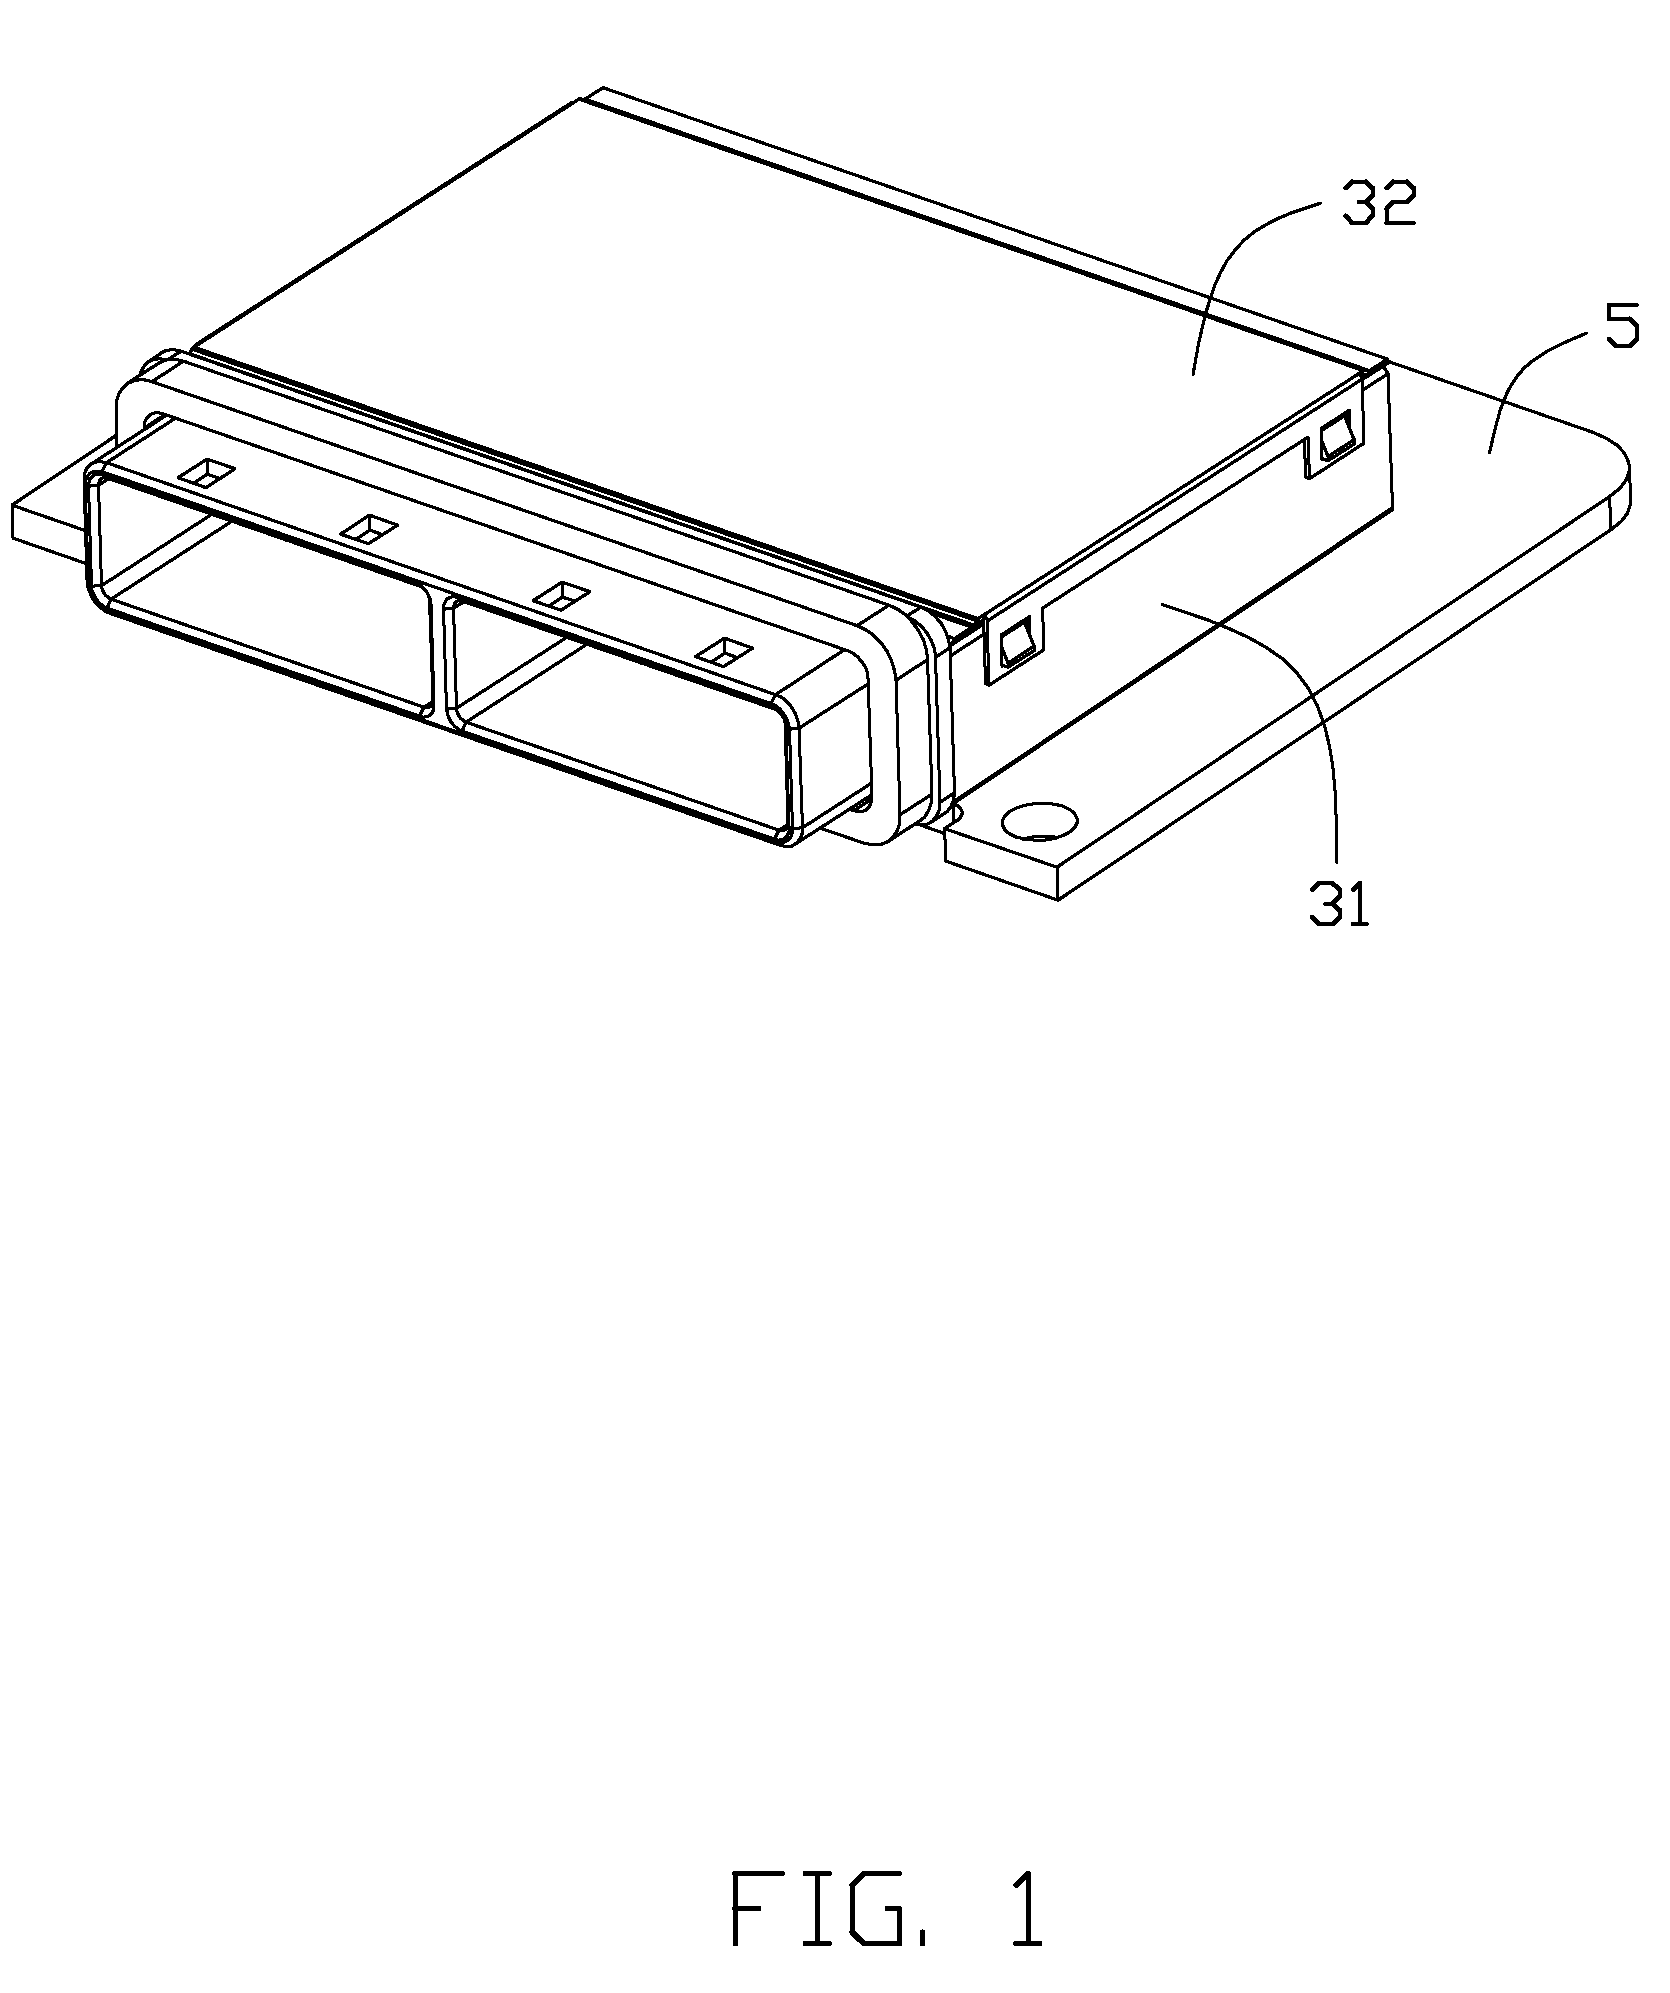 Electrical connector with metallic shell